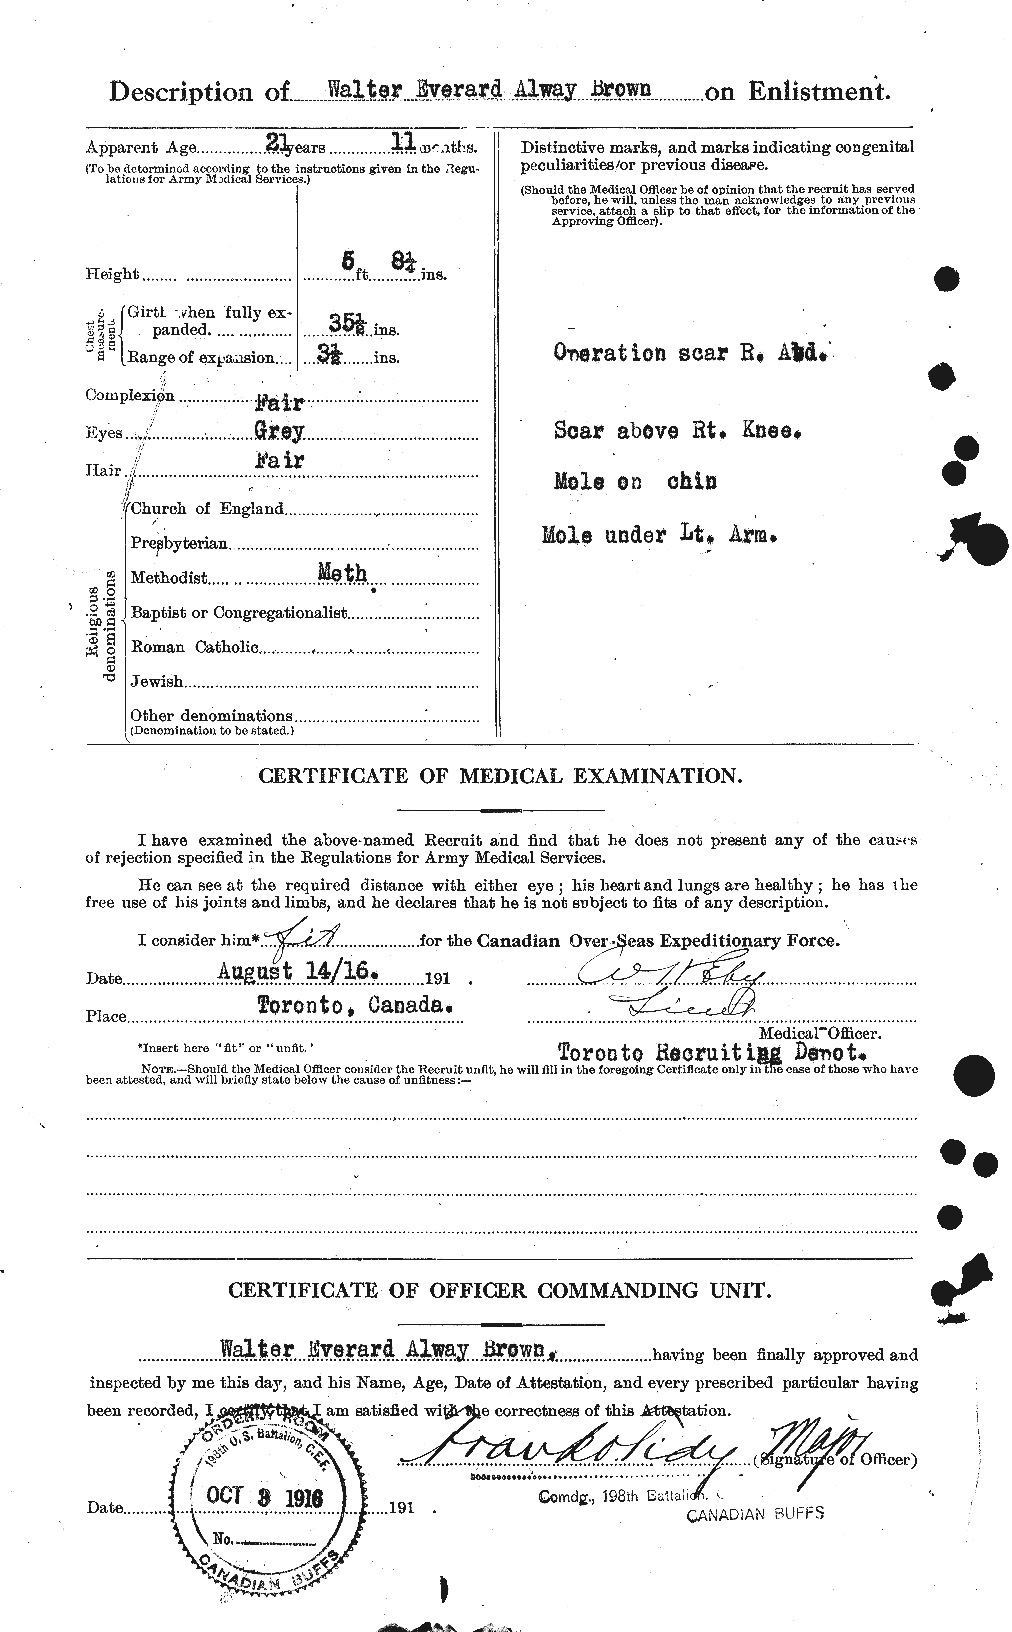 Personnel Records of the First World War - CEF 266663b